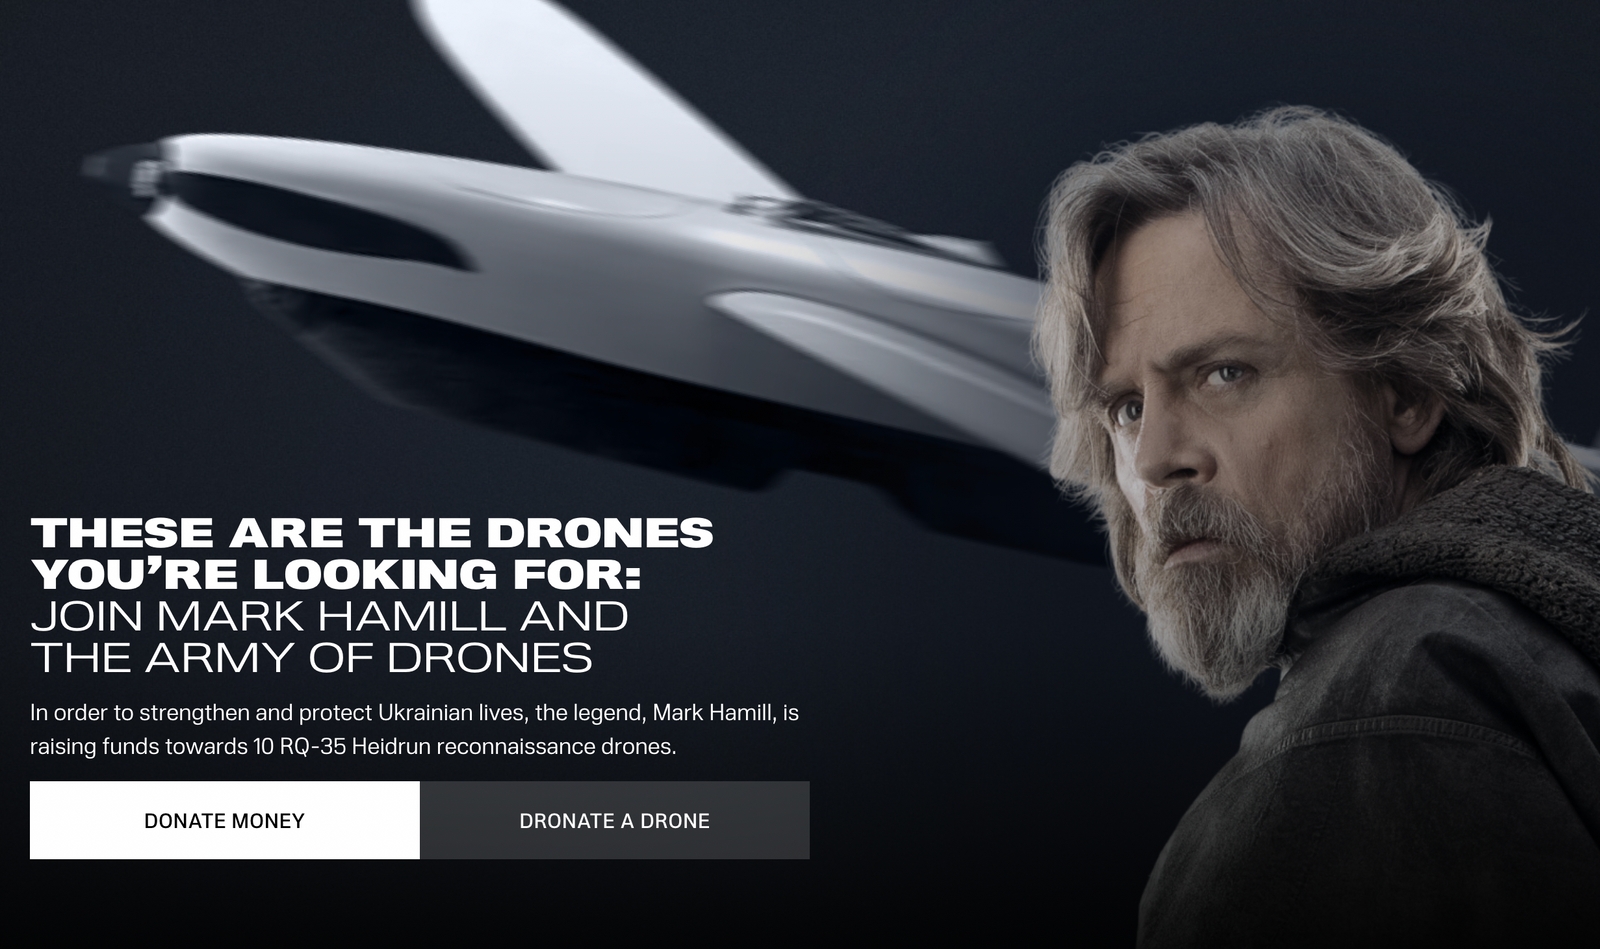 These Are the Drones You’re Looking For: Mark Hamill Launches a fundraiser for 10 RQ-35 Heidrun Reconnaissance Drones for the Armed Forces of Ukraine, via UNITED24